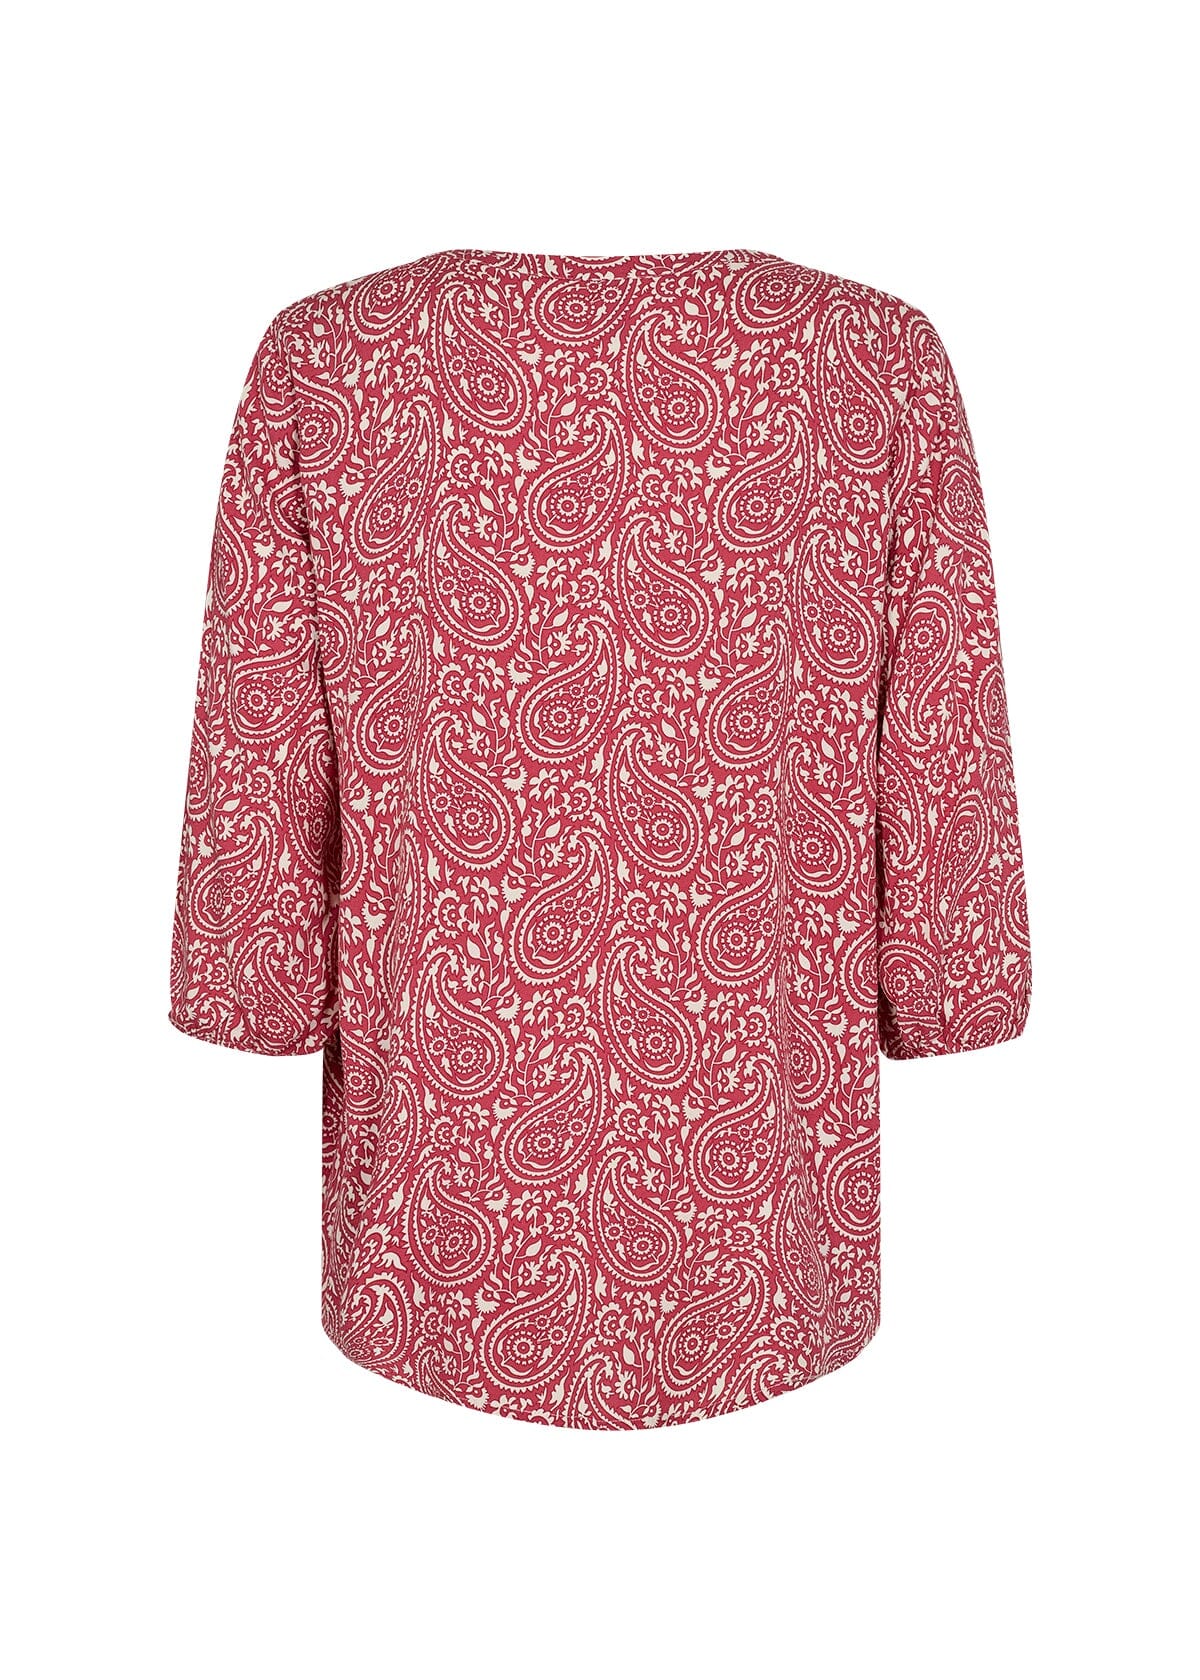 Molly 3/4 Sleeve Blouse in Berry Combi Blouse Soyaconcept 